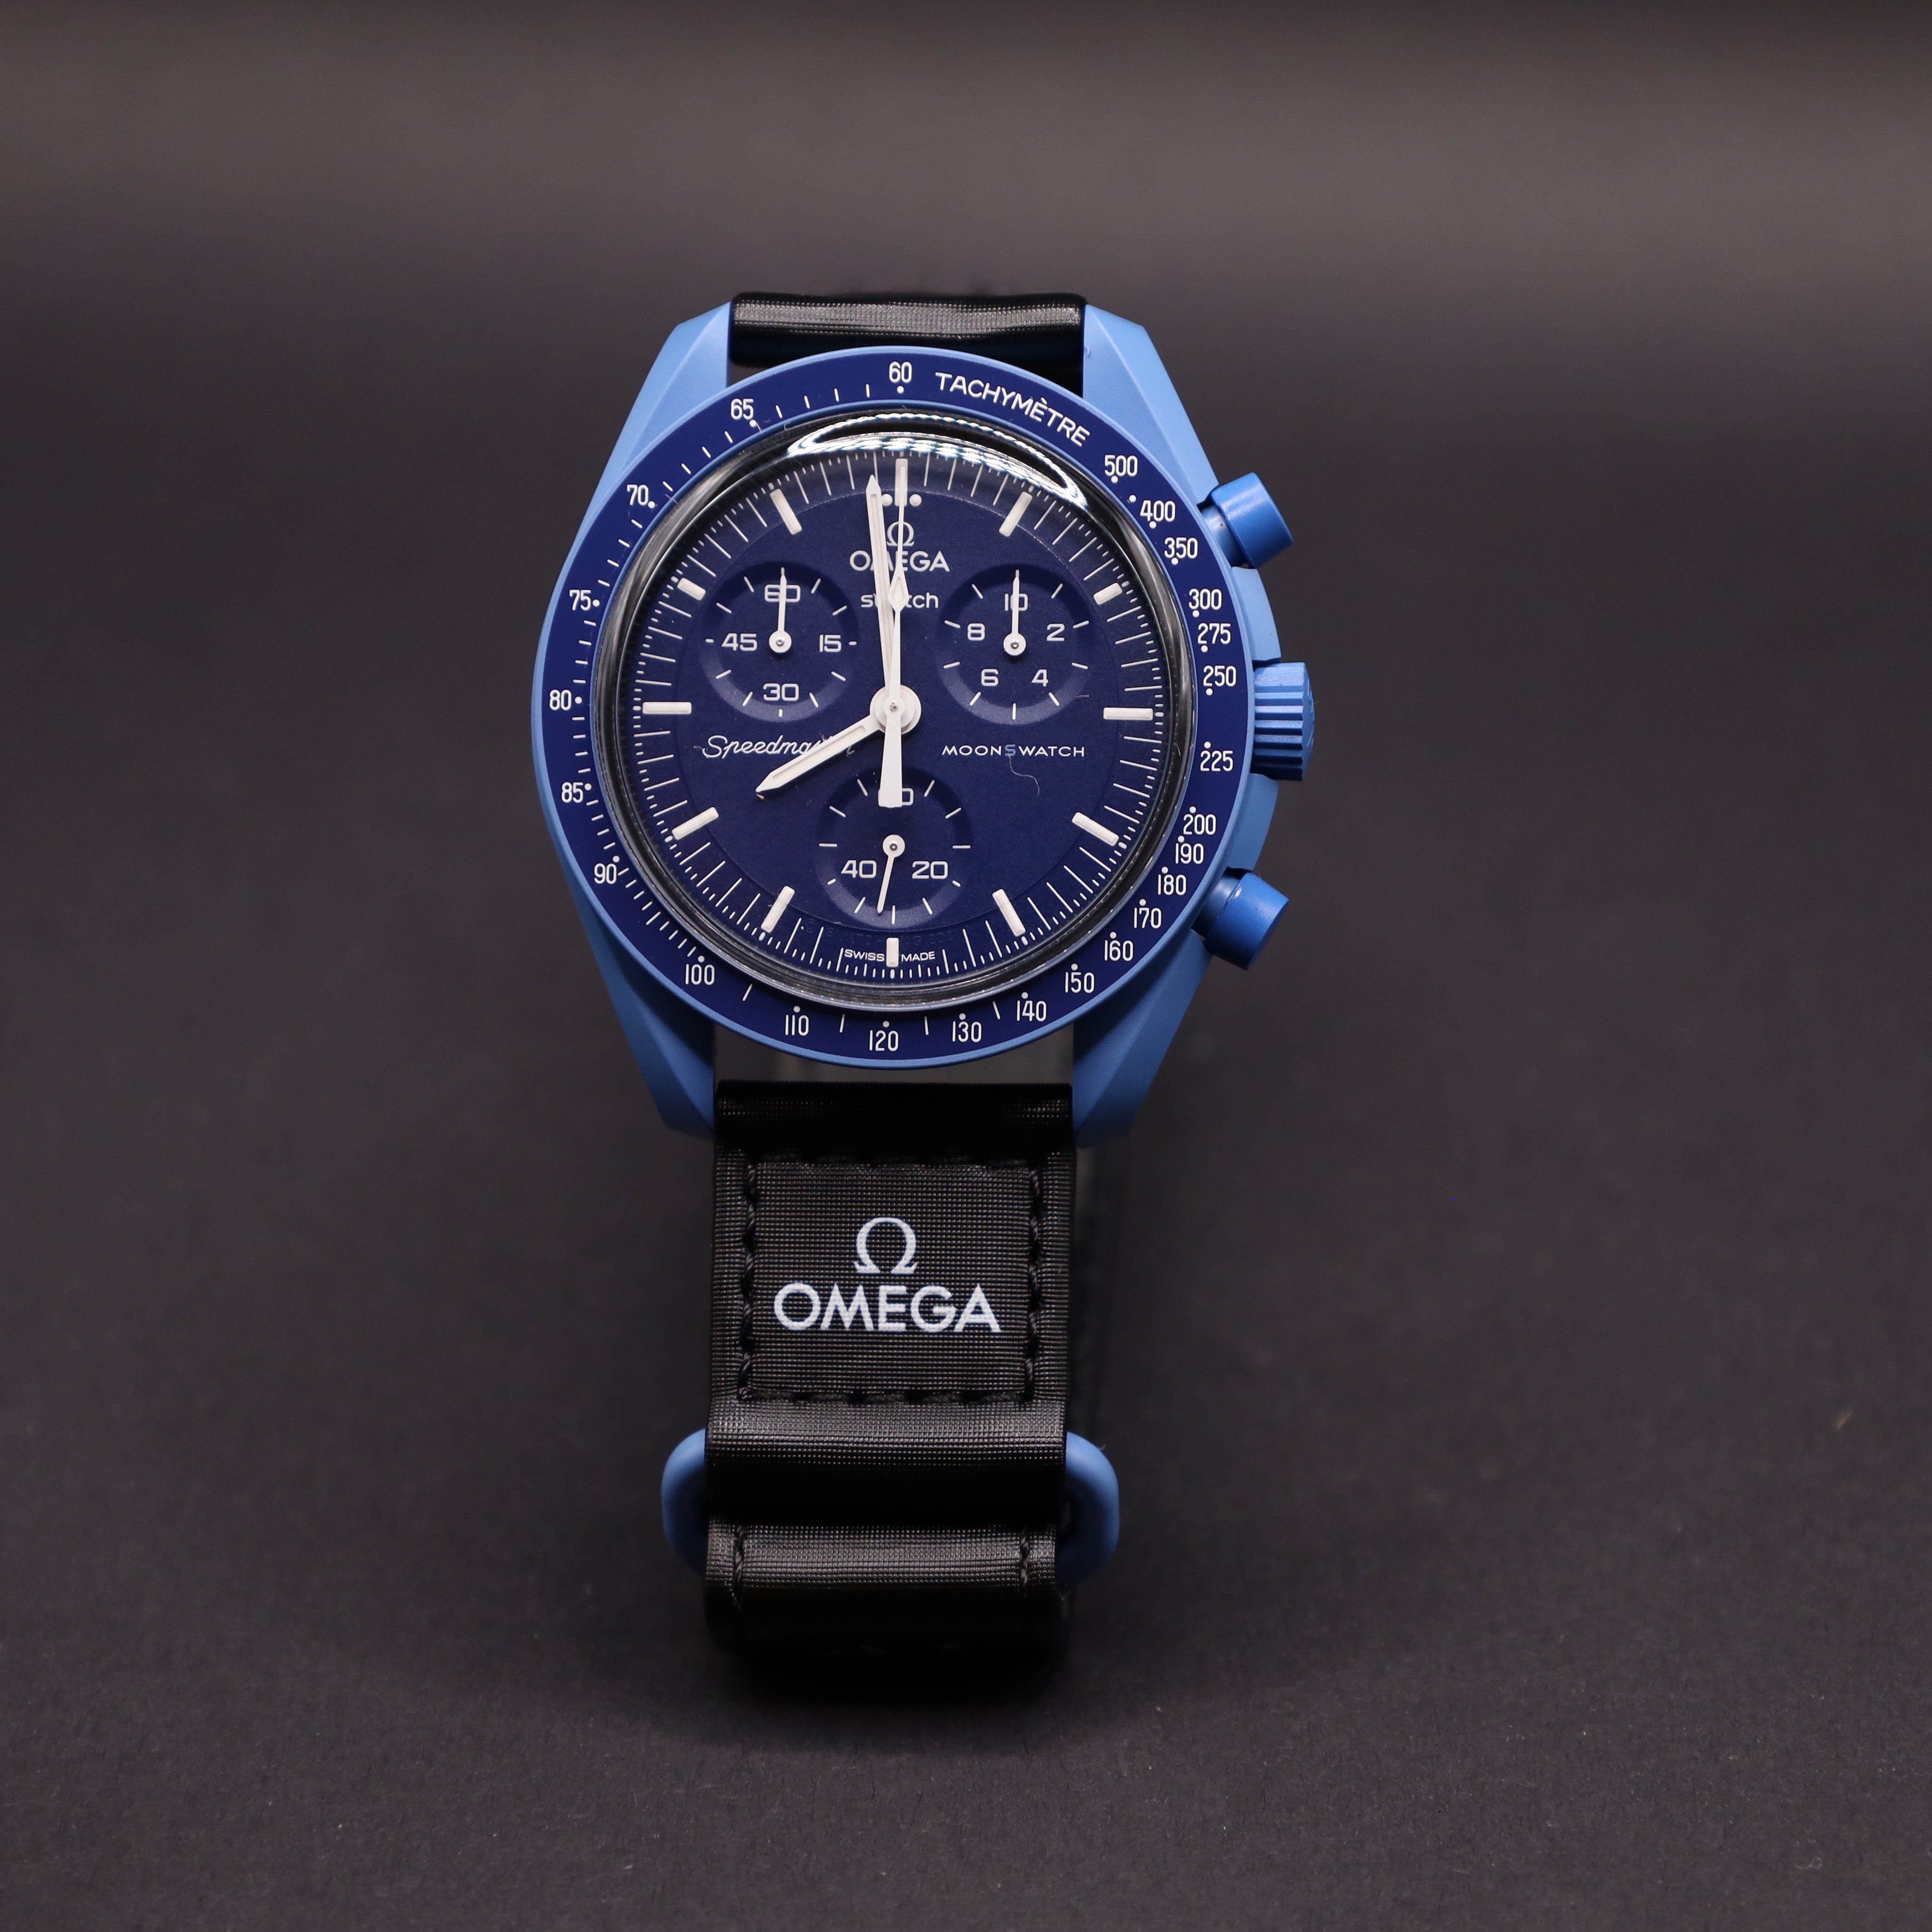 Der Hauptladen ist Omega Chronograph Swatch Omega Neptune SO33N100, to Moonswatch Mission (1-tlg) Bioceramic